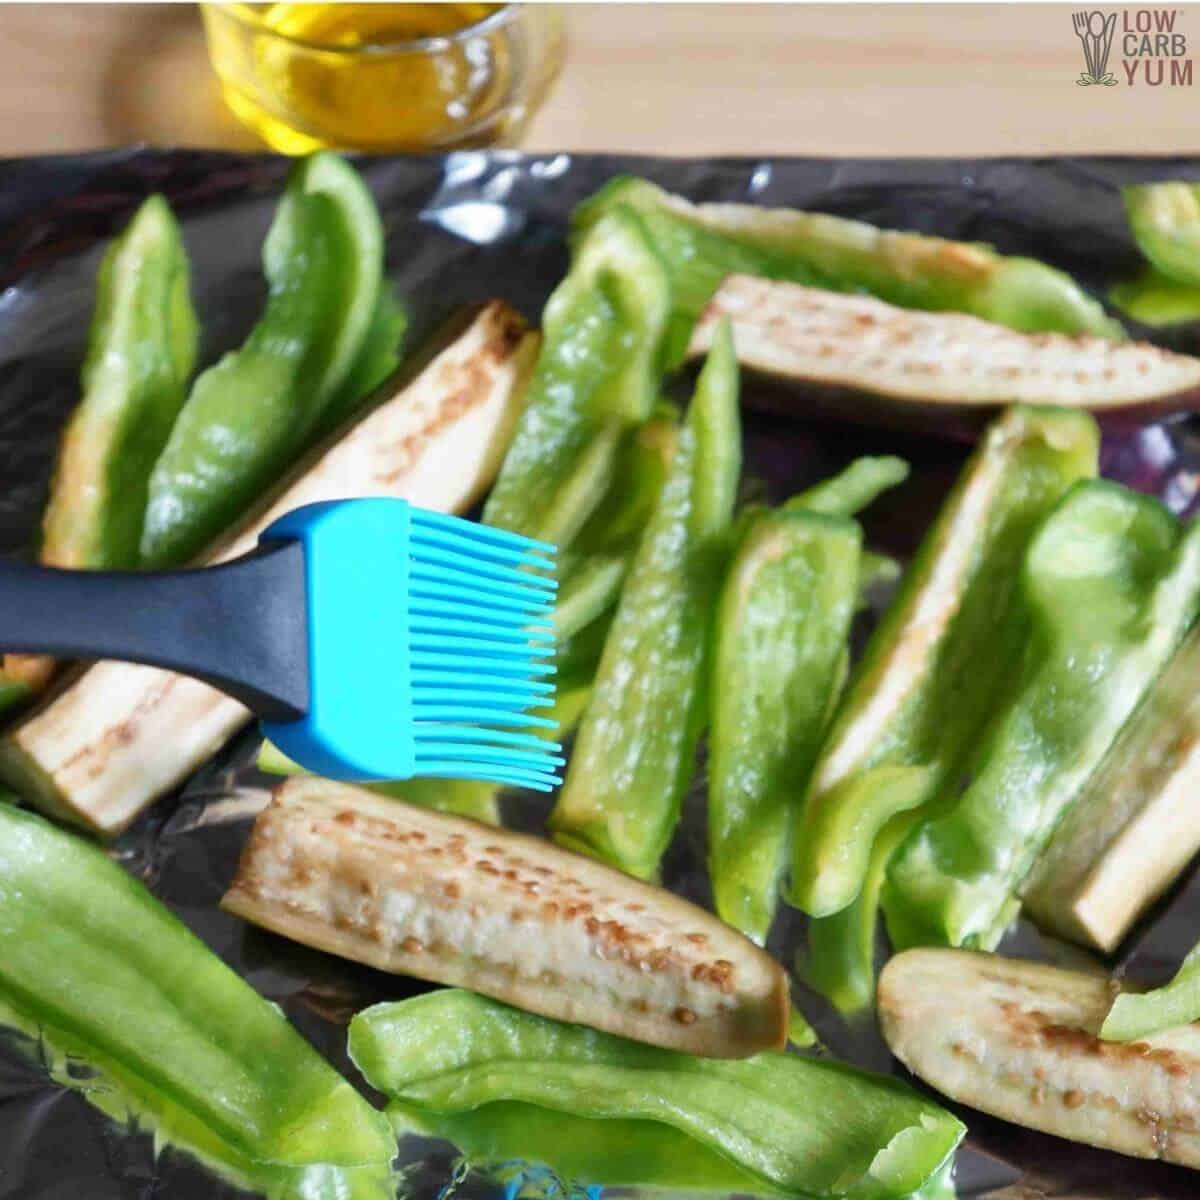 brushing olive oil on cut eggplant and bell peppers